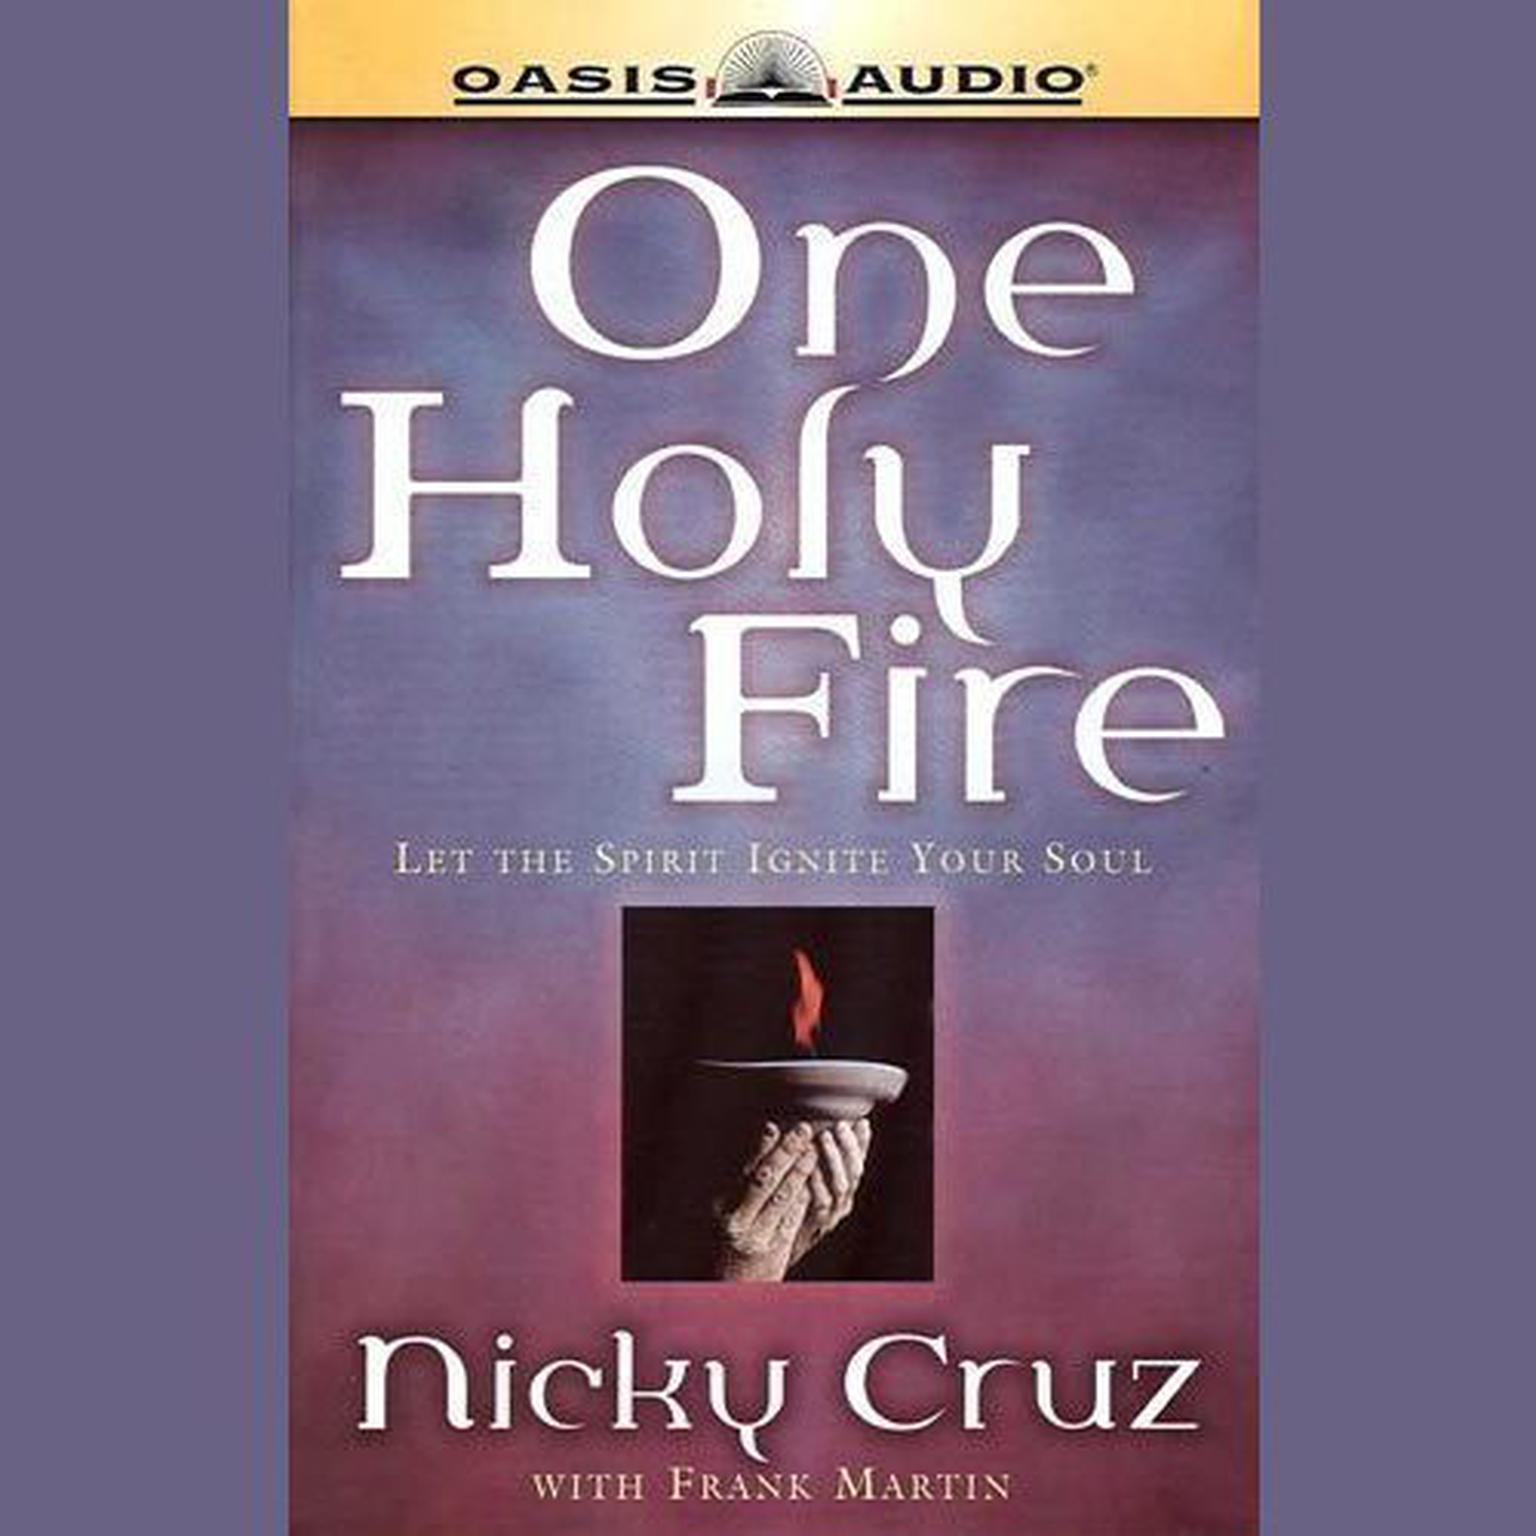 One Holy Fire (Abridged): Let the Spirit Ignite Your Soul Audiobook, by Nicky Cruz